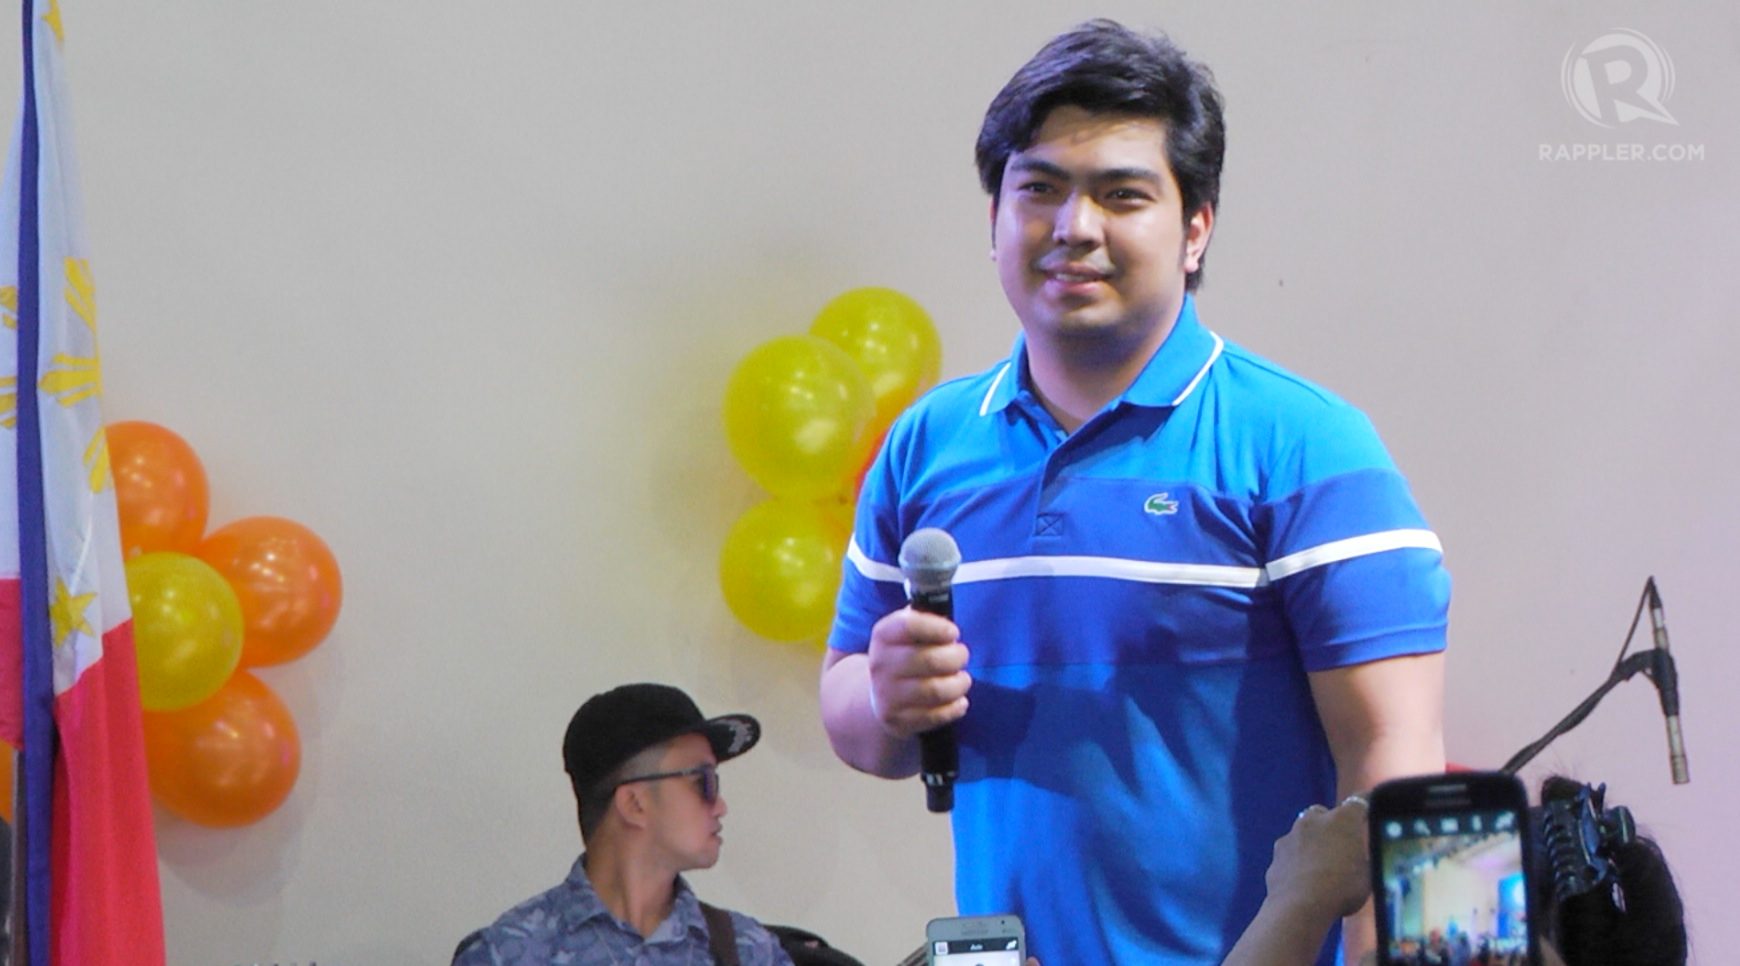 On bended knees, Jolo Revilla begs Caviteños to support Poe